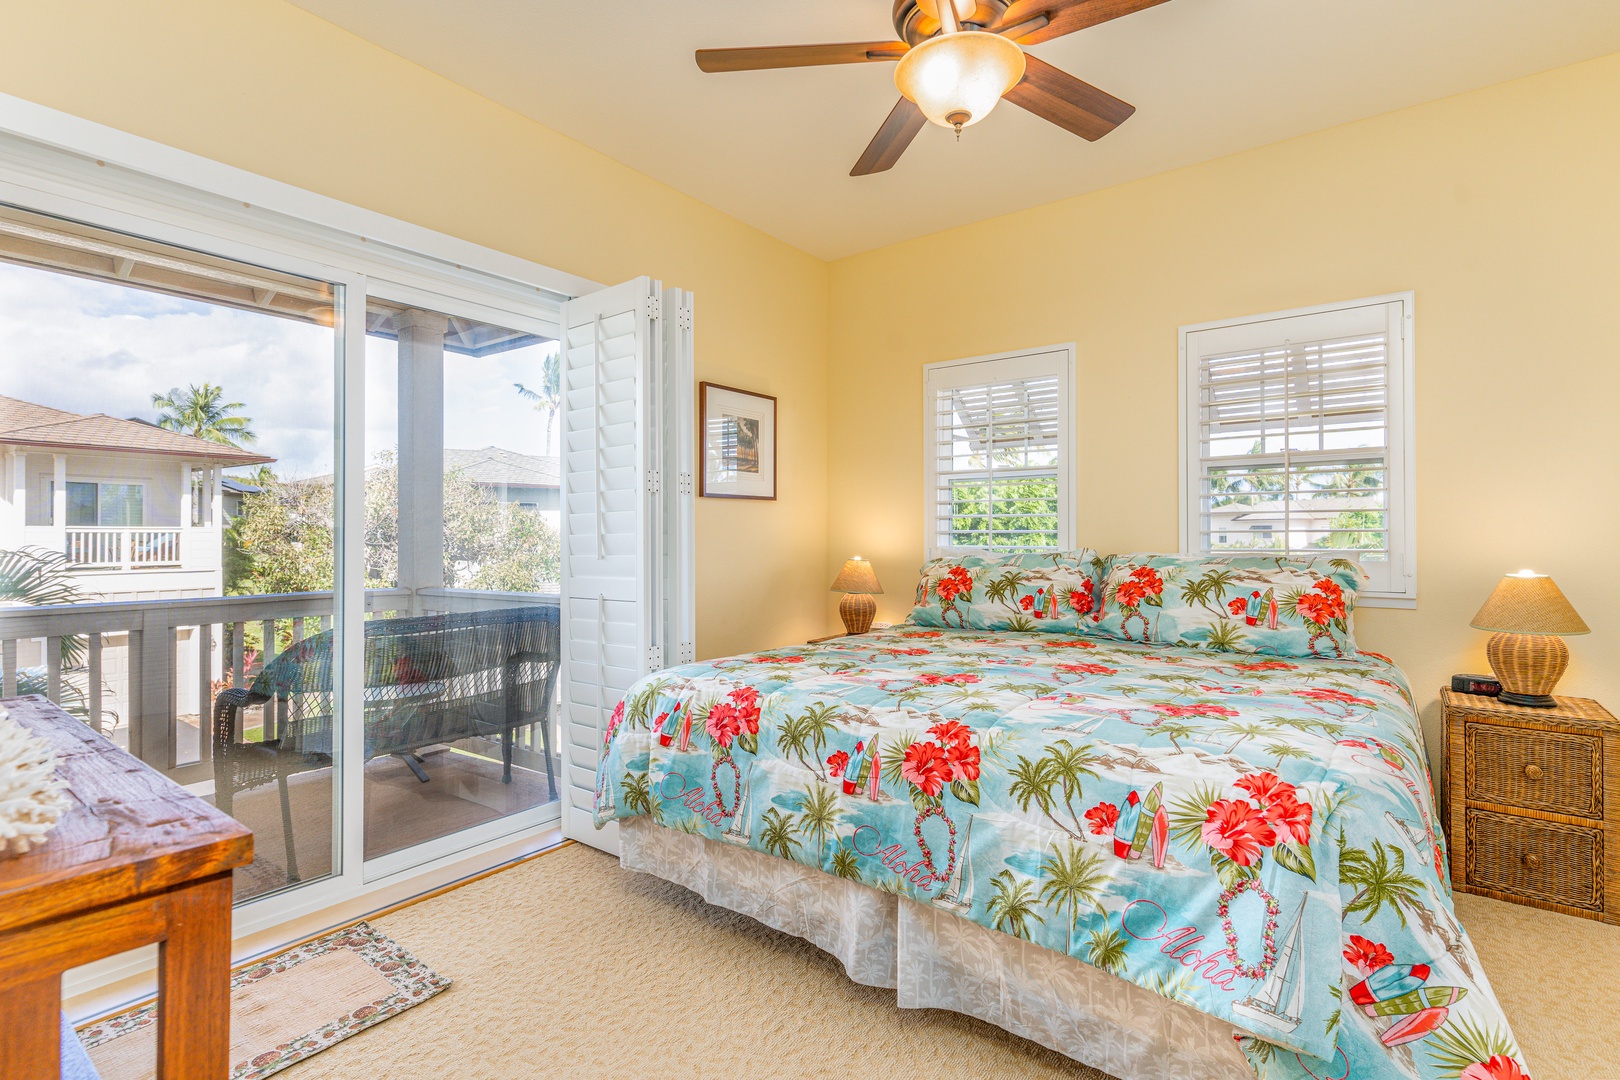 Kapolei Vacation Rentals, Coconut Plantation 1100-2 - The second guest bedroom with TV, floral prints and lanai access.